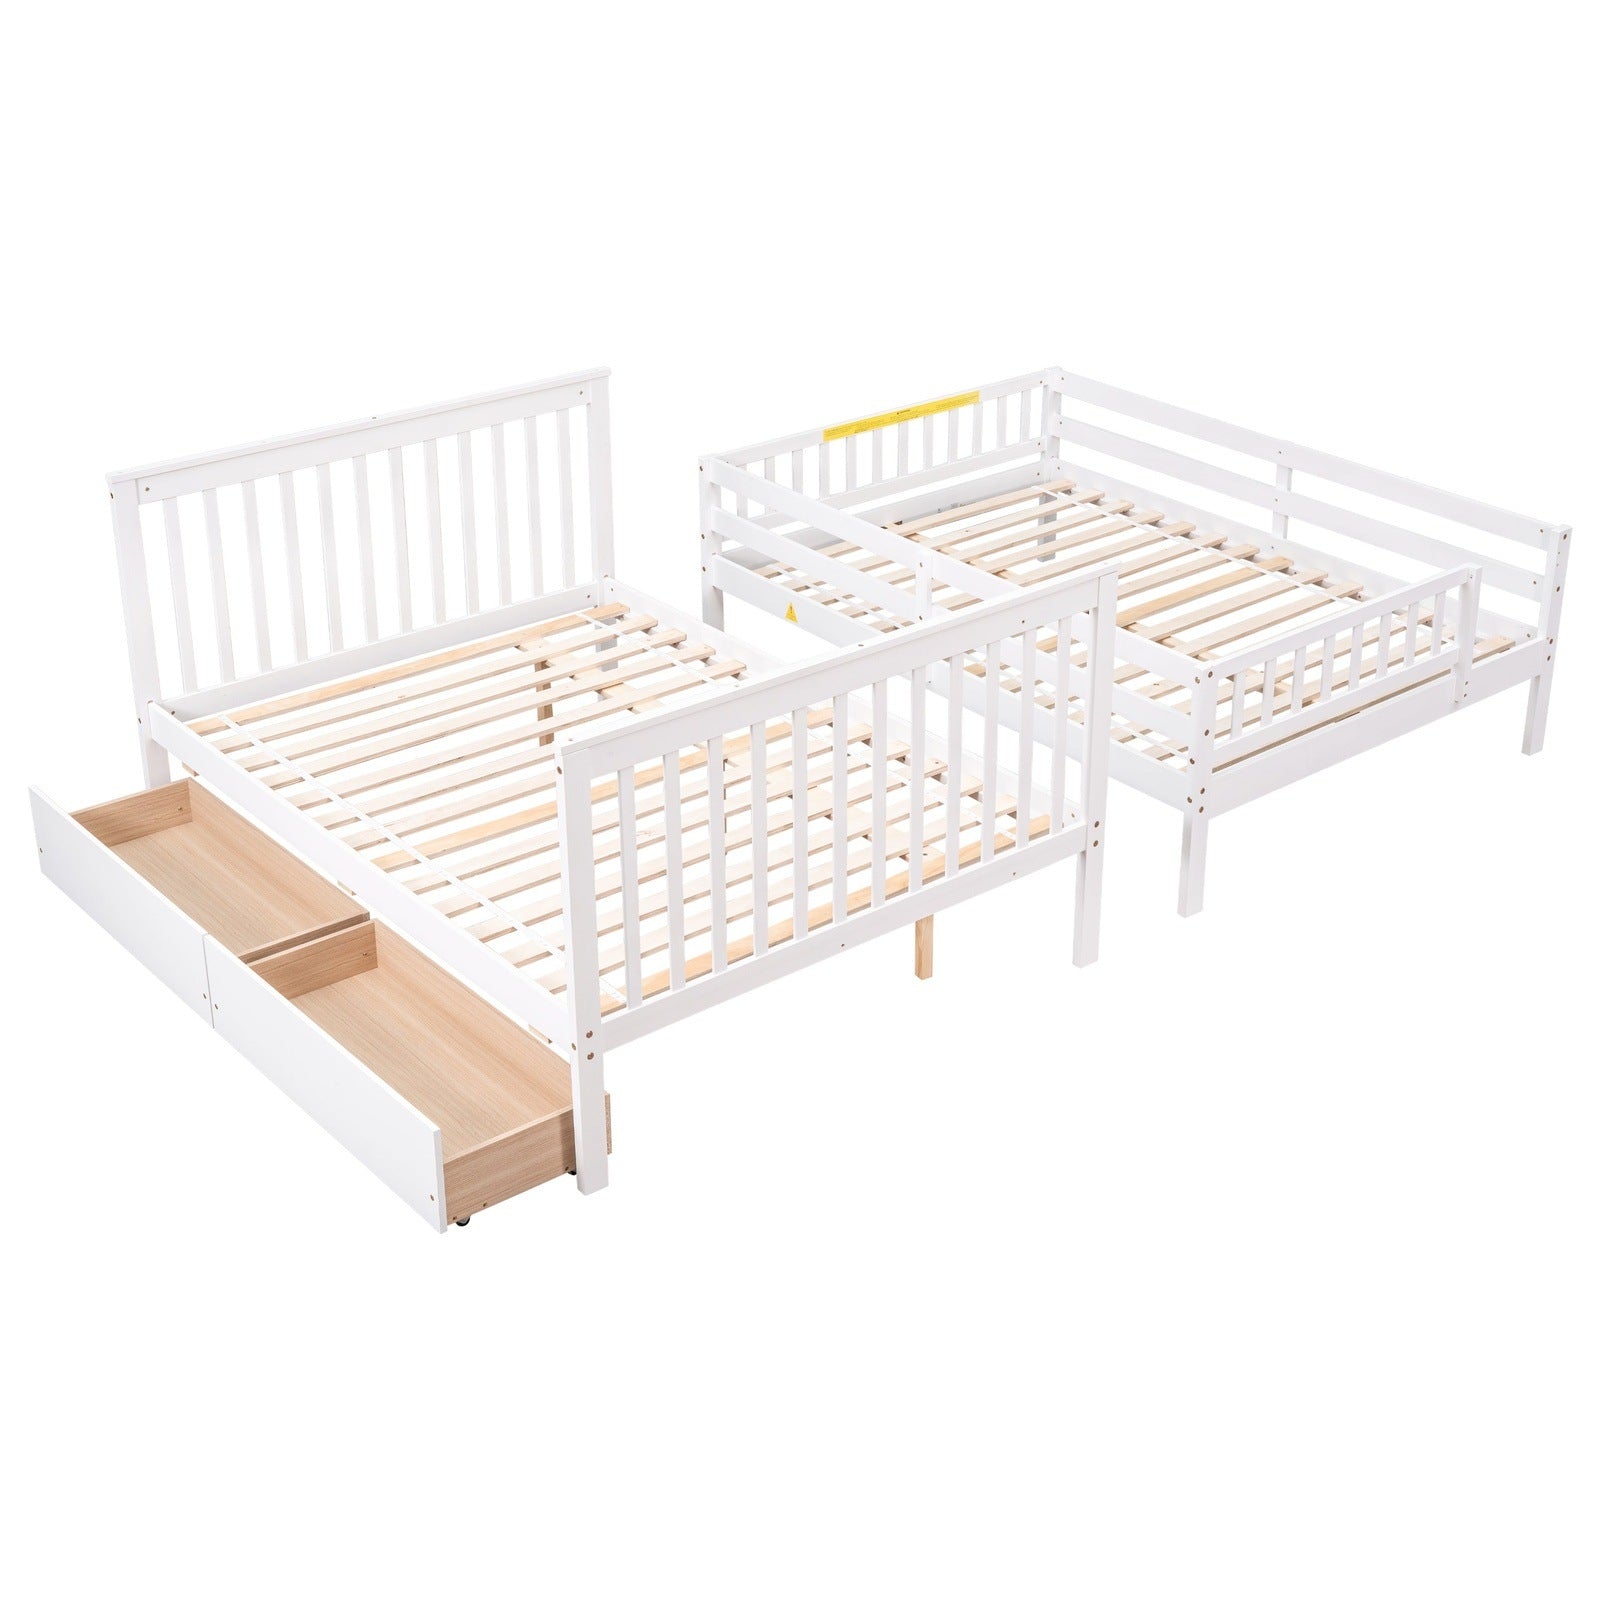 Inspirit Full over Full Convertible Bunk Bed with Storage & Staircase - White